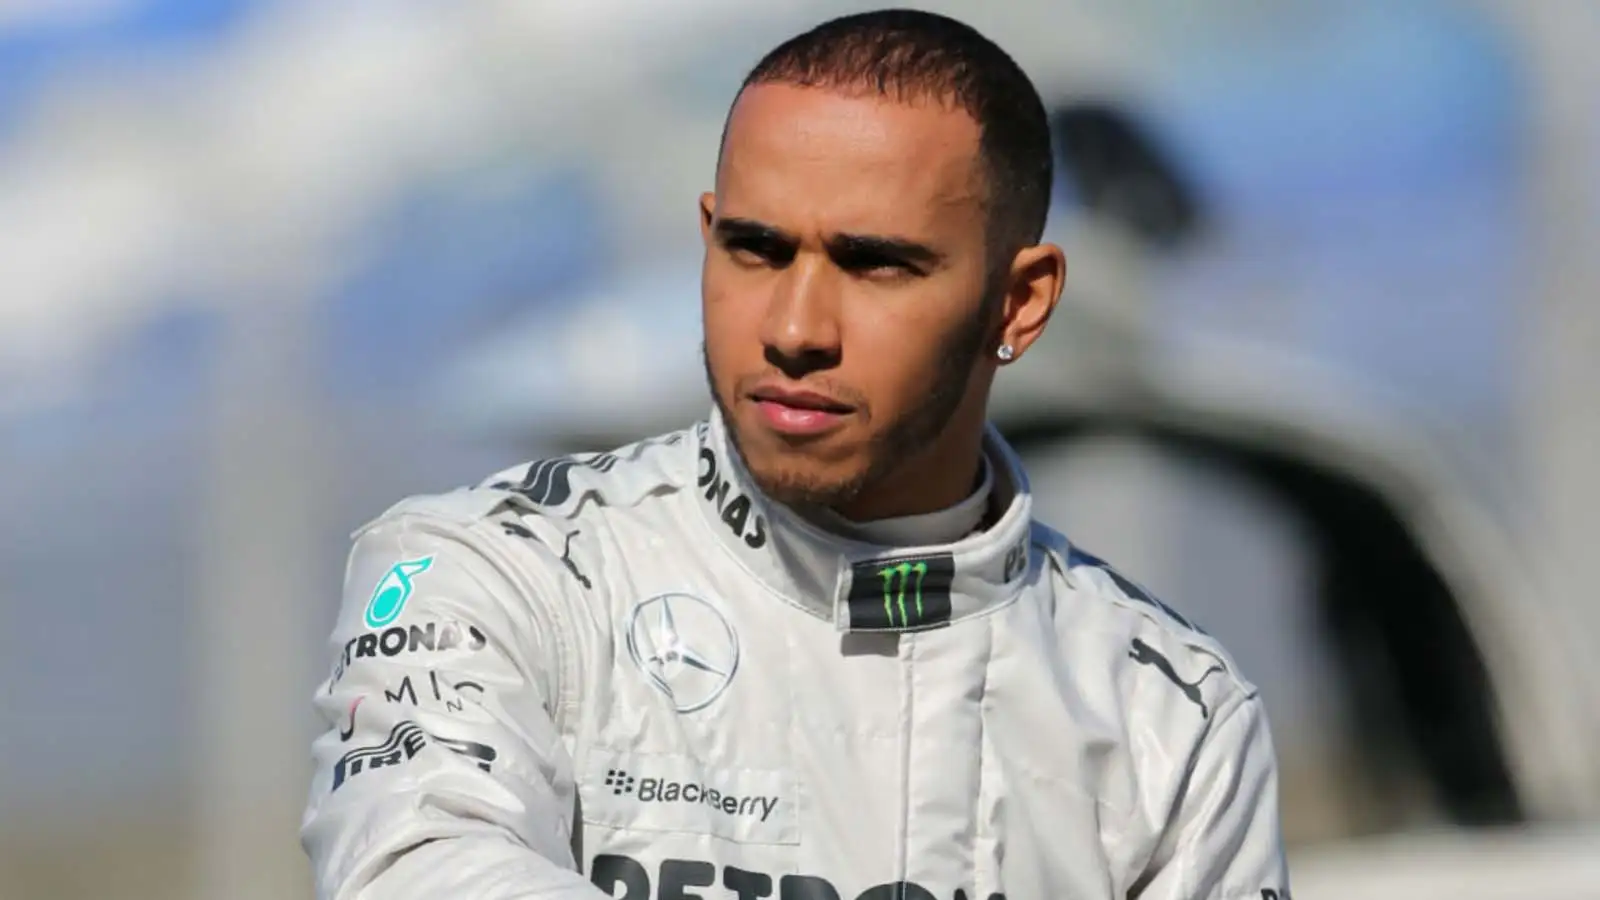 Lewis Hamilton at the Mercedes W04 launch. February 2013.